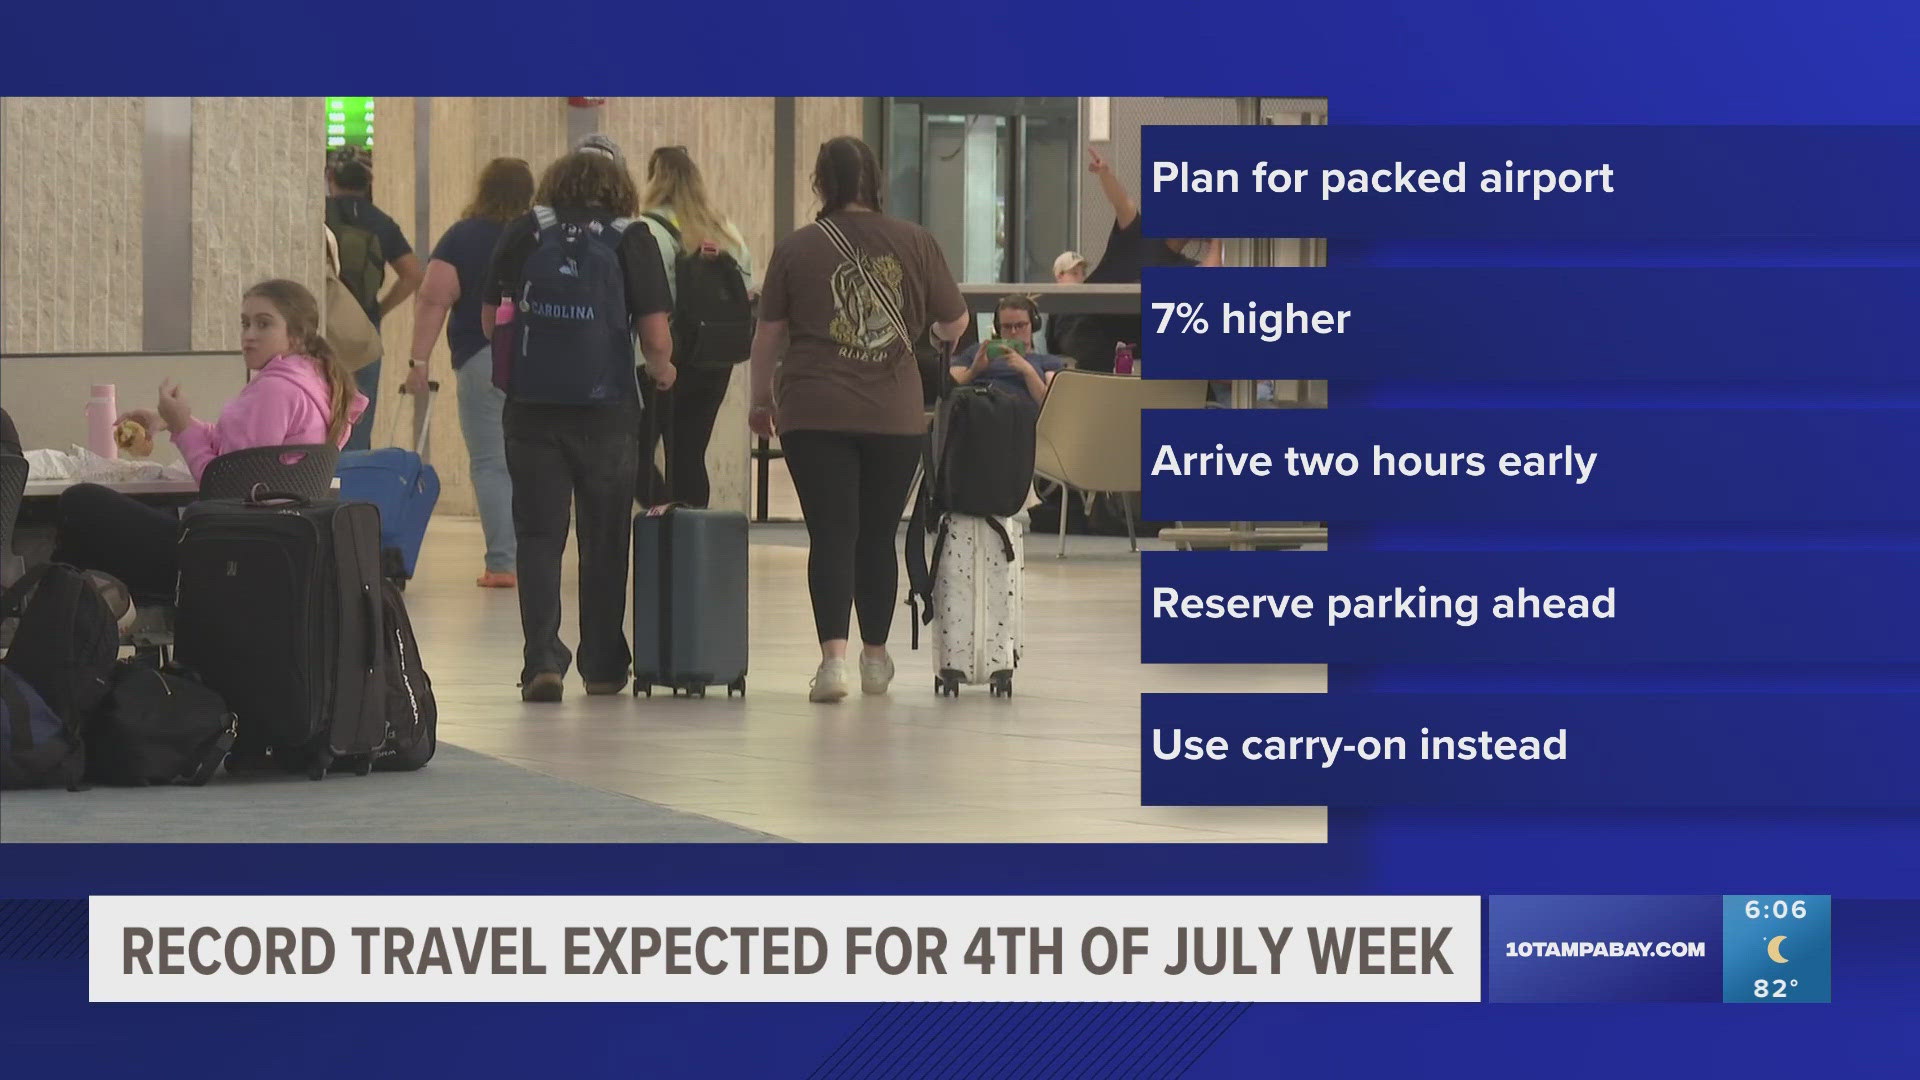 Airports across the country are expected to be slammed ahead of the holiday.